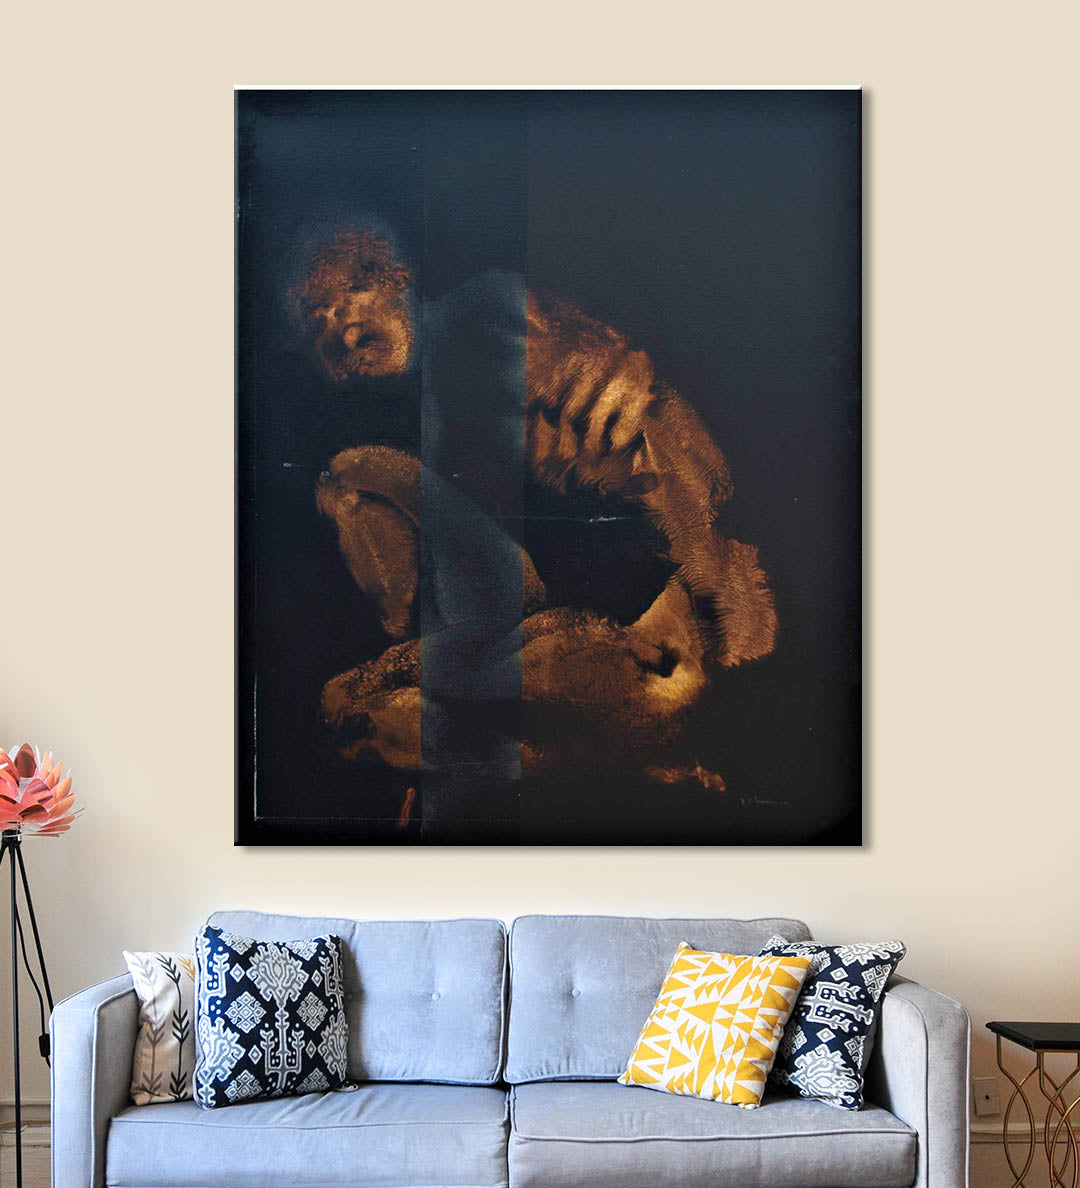 Strength Digital Art Painting by Vikas Chandra Hanging on the Wall above the Sofa